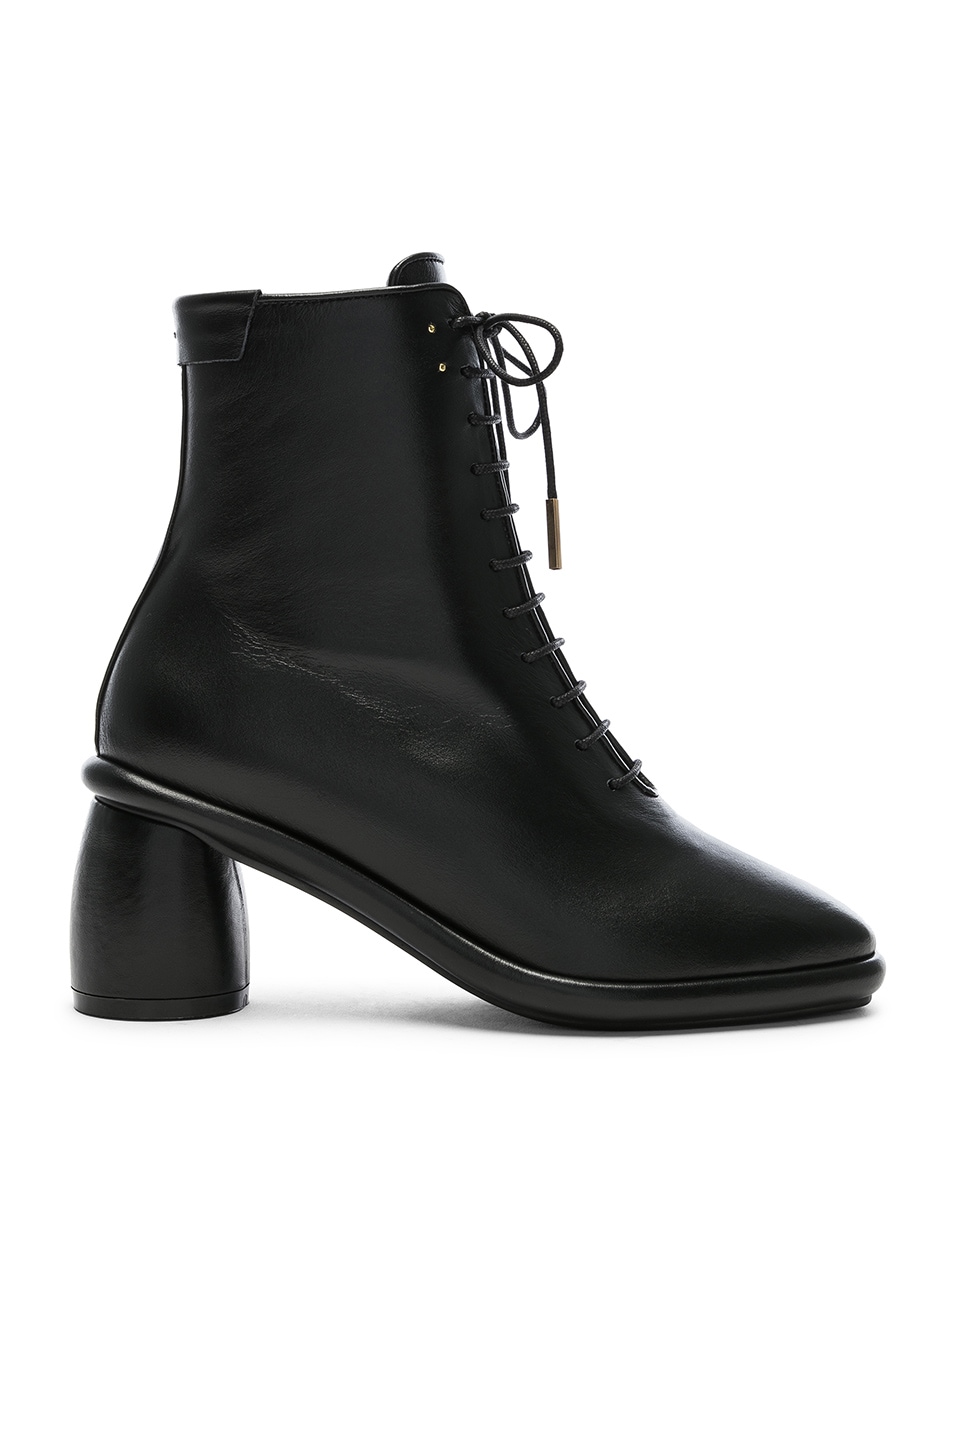 Image 1 of Reike Nen Leather Plain Middle Lace Up Boots in Black